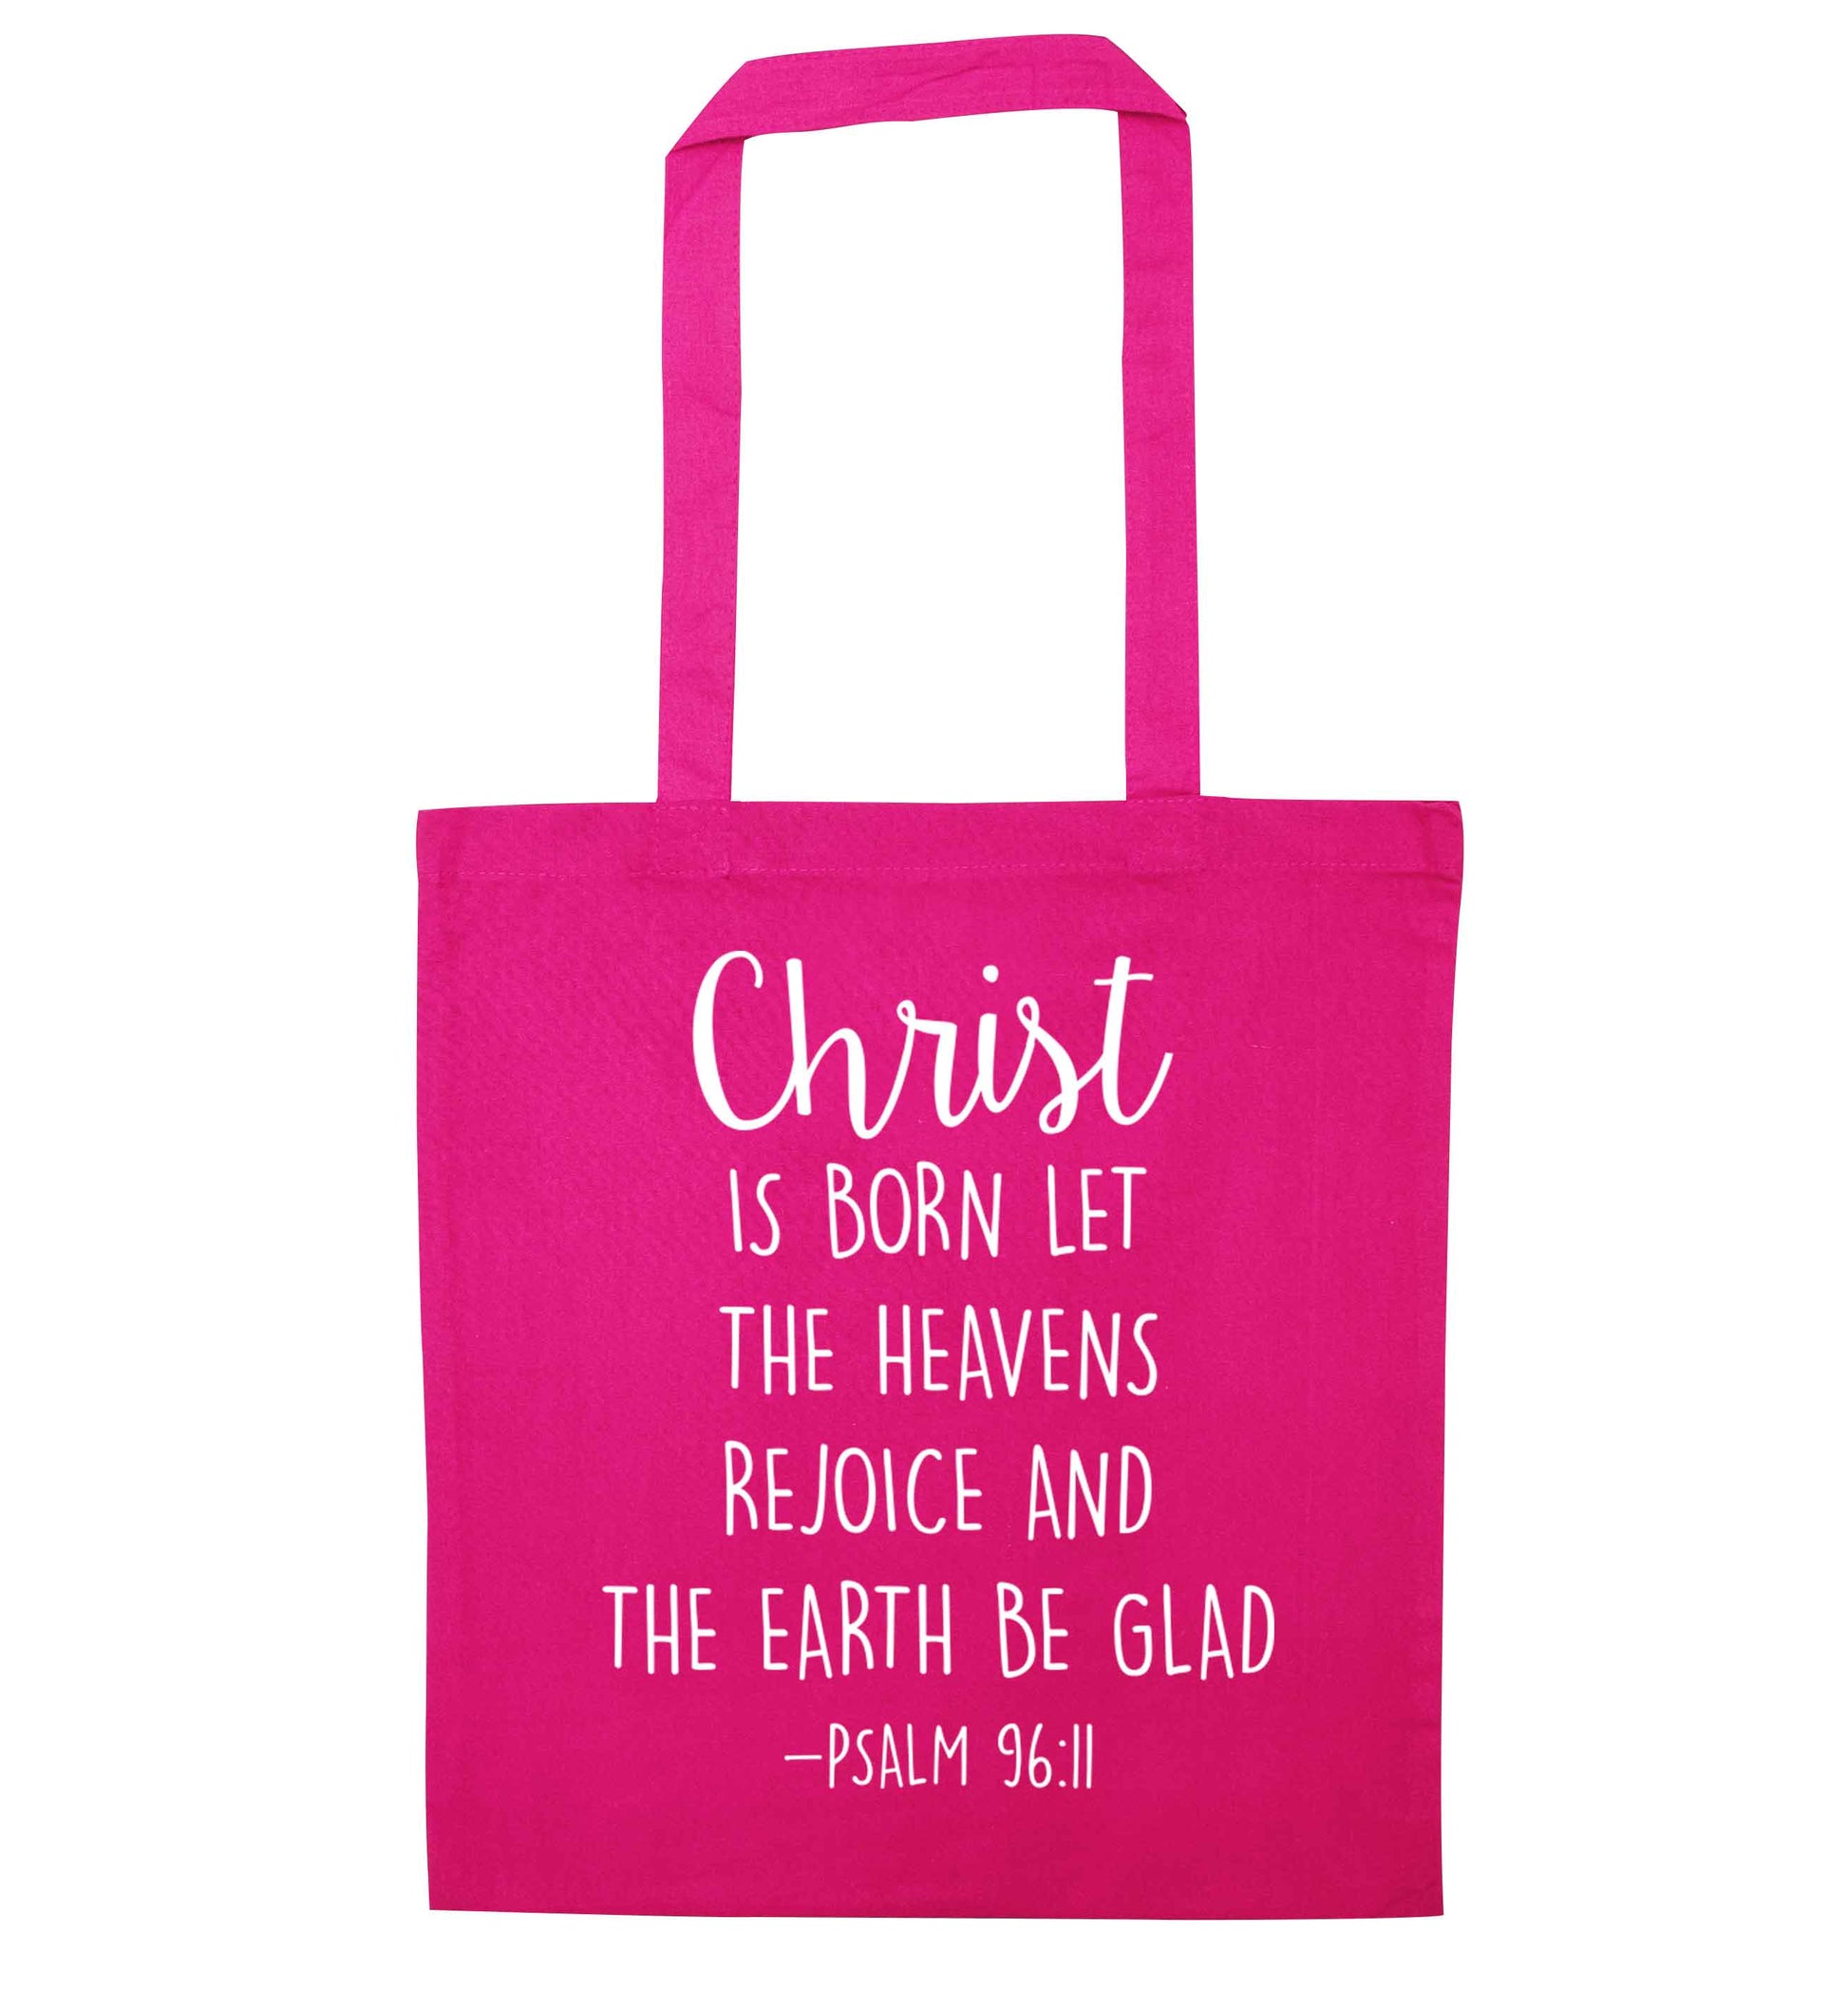 Christ is Born Psalm 96:11 pink tote bag